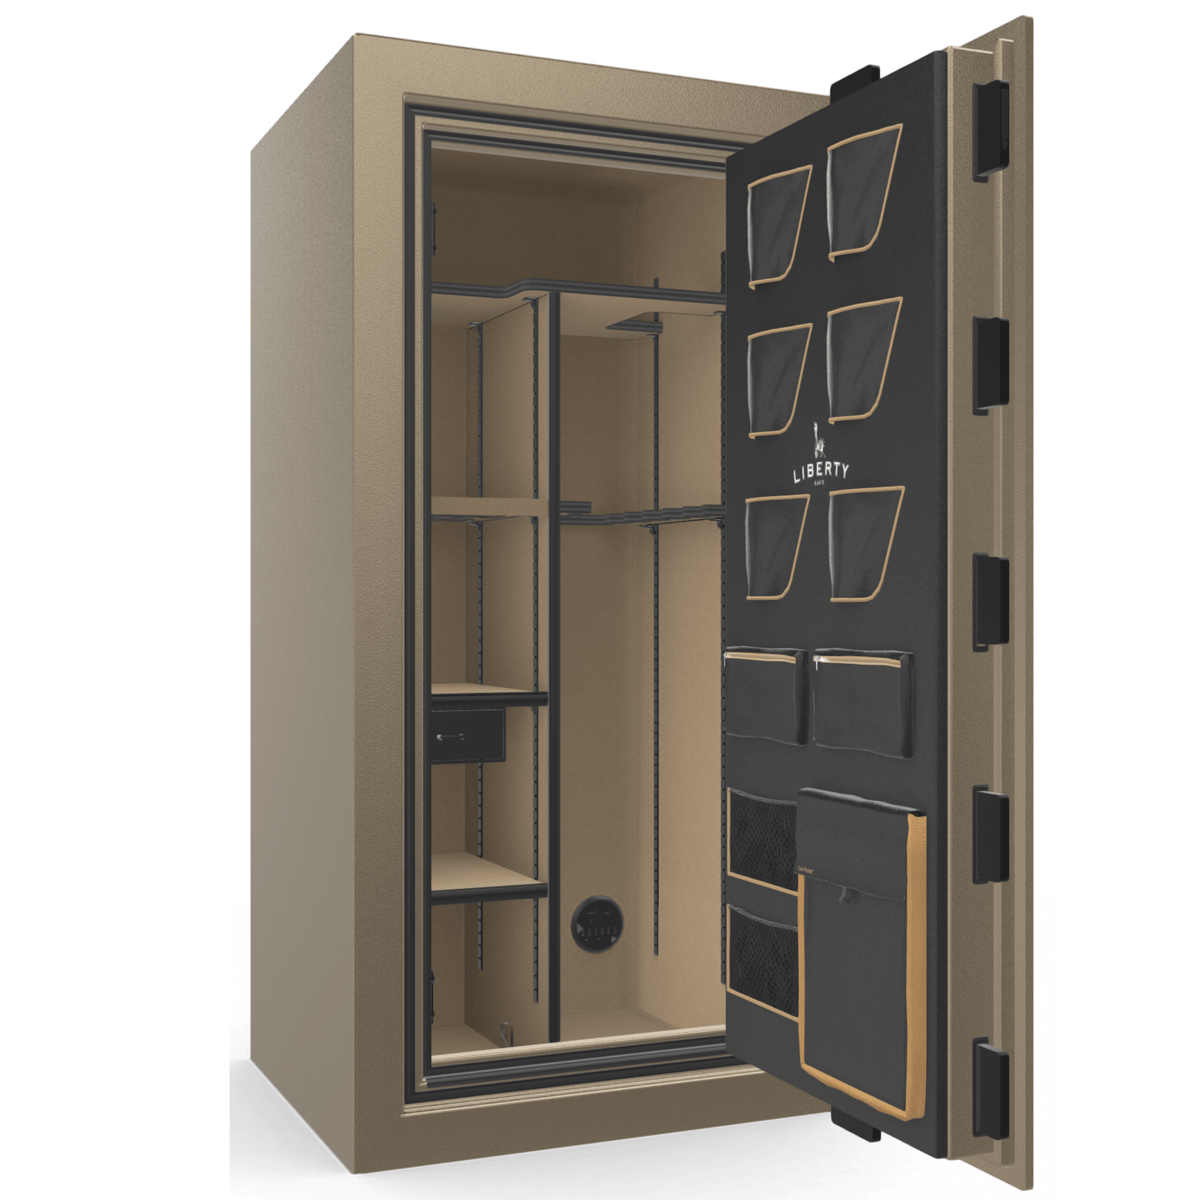 Liberty Safe Classic Plus 25 in Champagne Marble, open door.